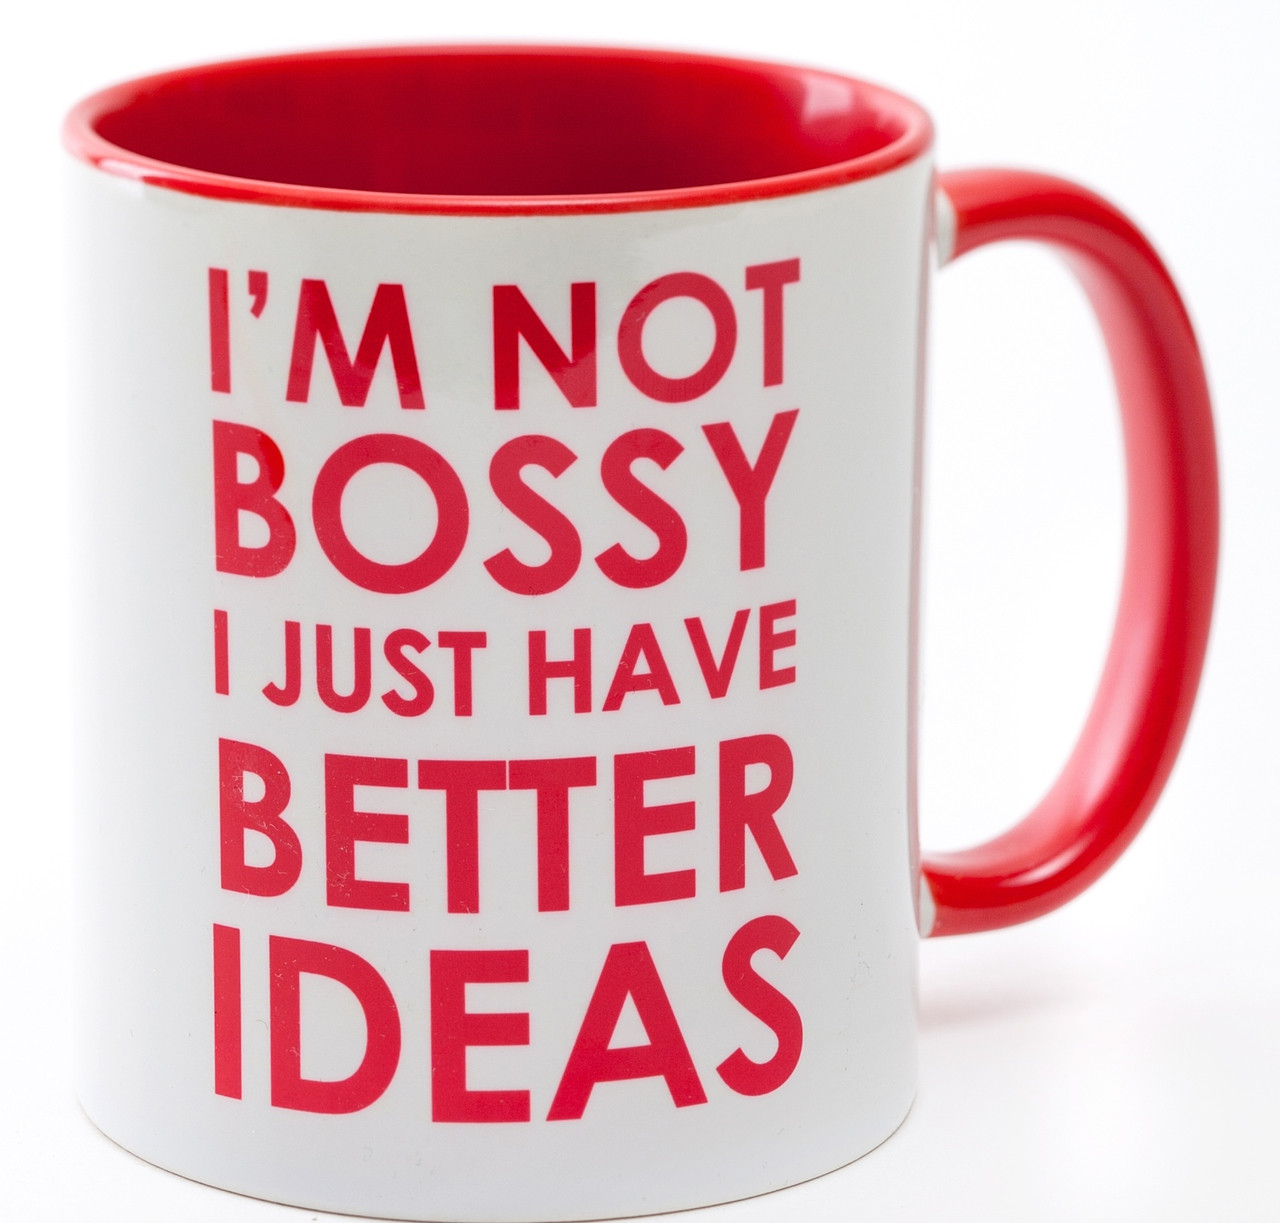 Novelty Mugs Are the Only Mugs I Want to Drink My Coffee From